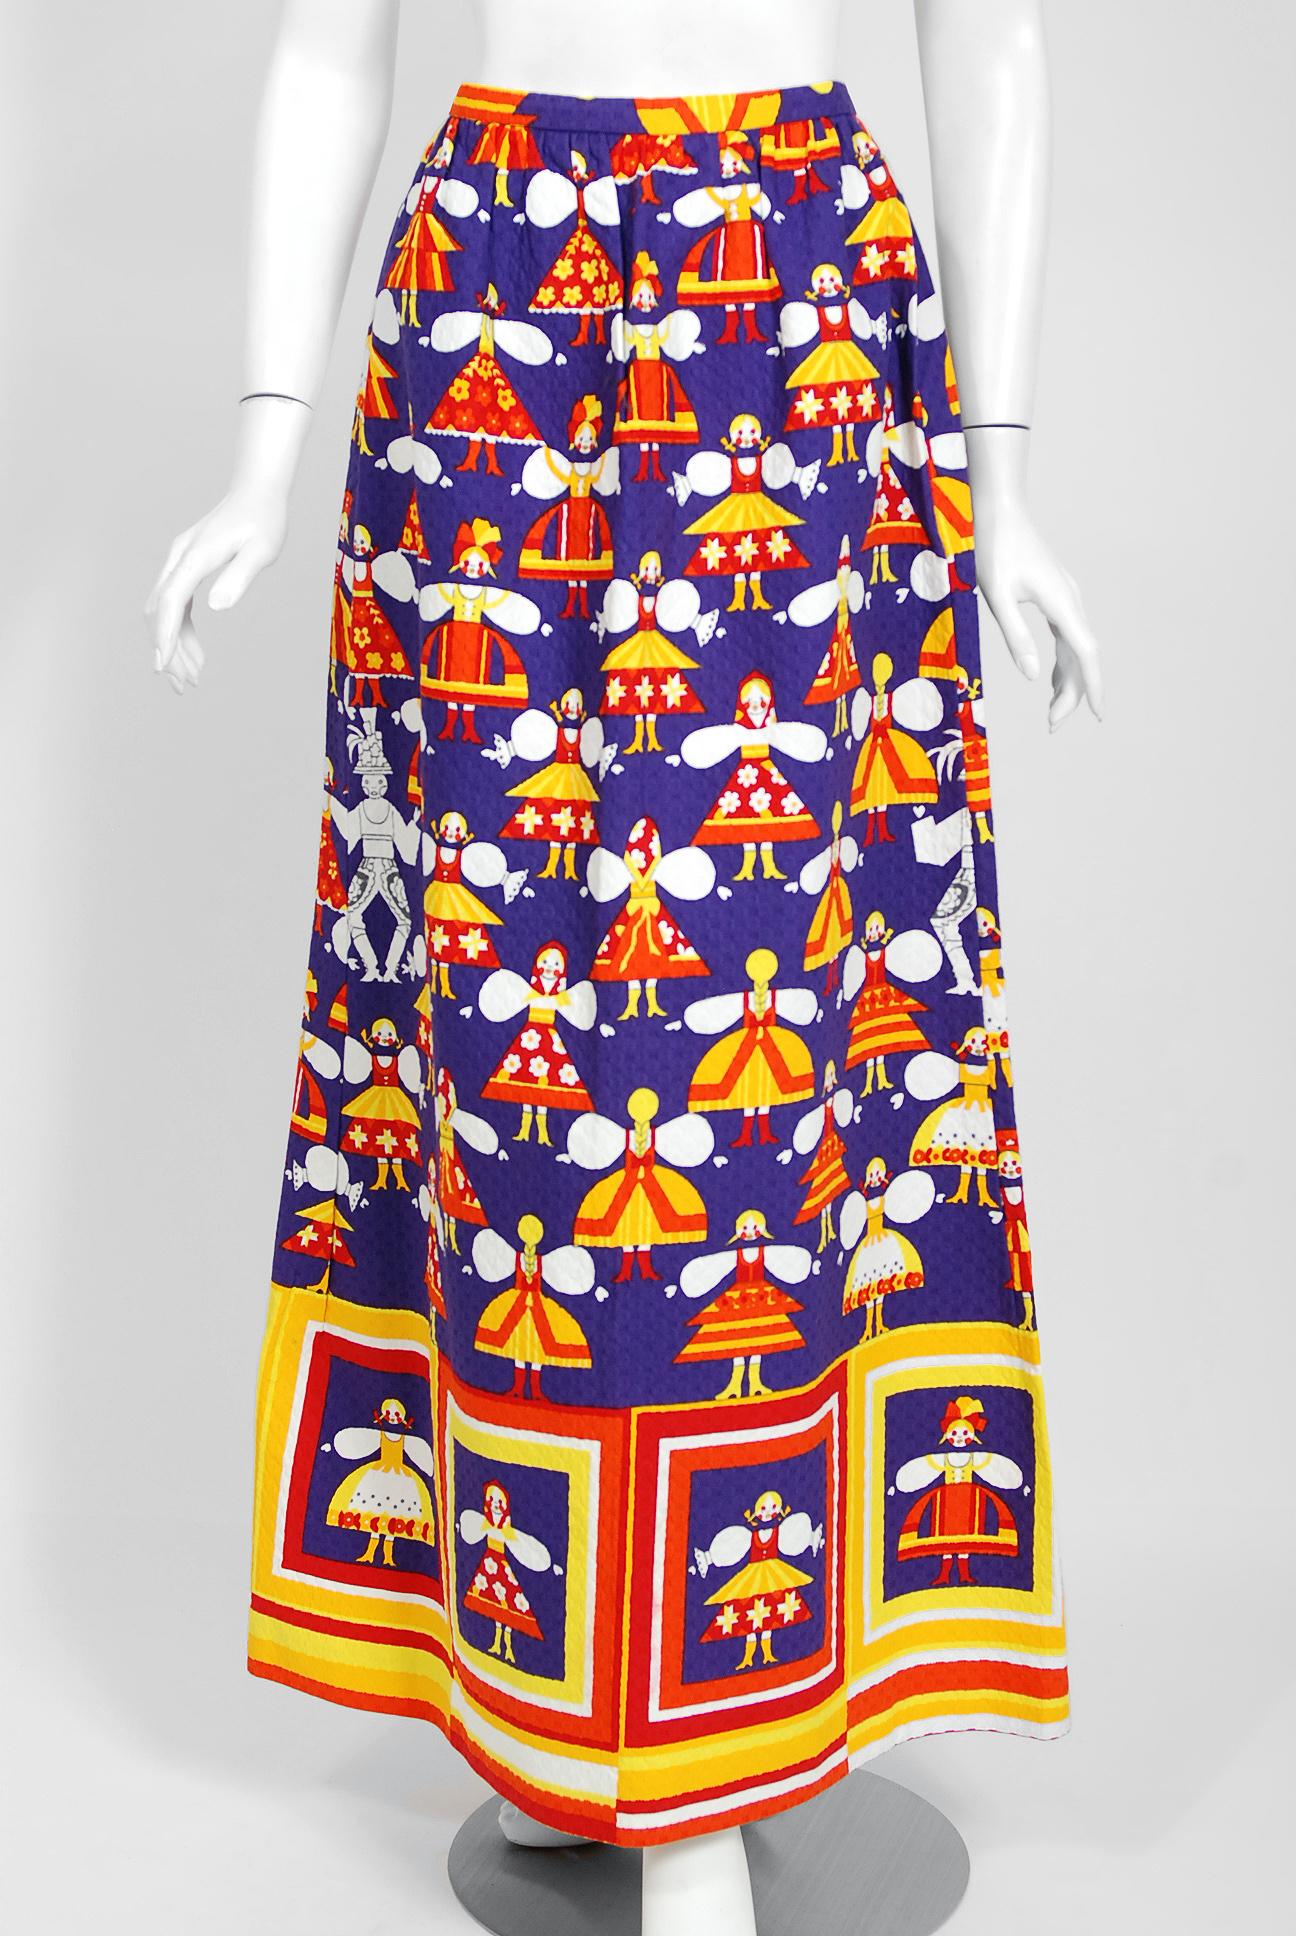 This adorable Lanvin Paris skirt, in the most stunning graphic novelty print textured pique cotton, is a statement piece. I love the vibrant colors and large scale paper dolls print. It manifests liveliness and makes you feel playful. Shaped with